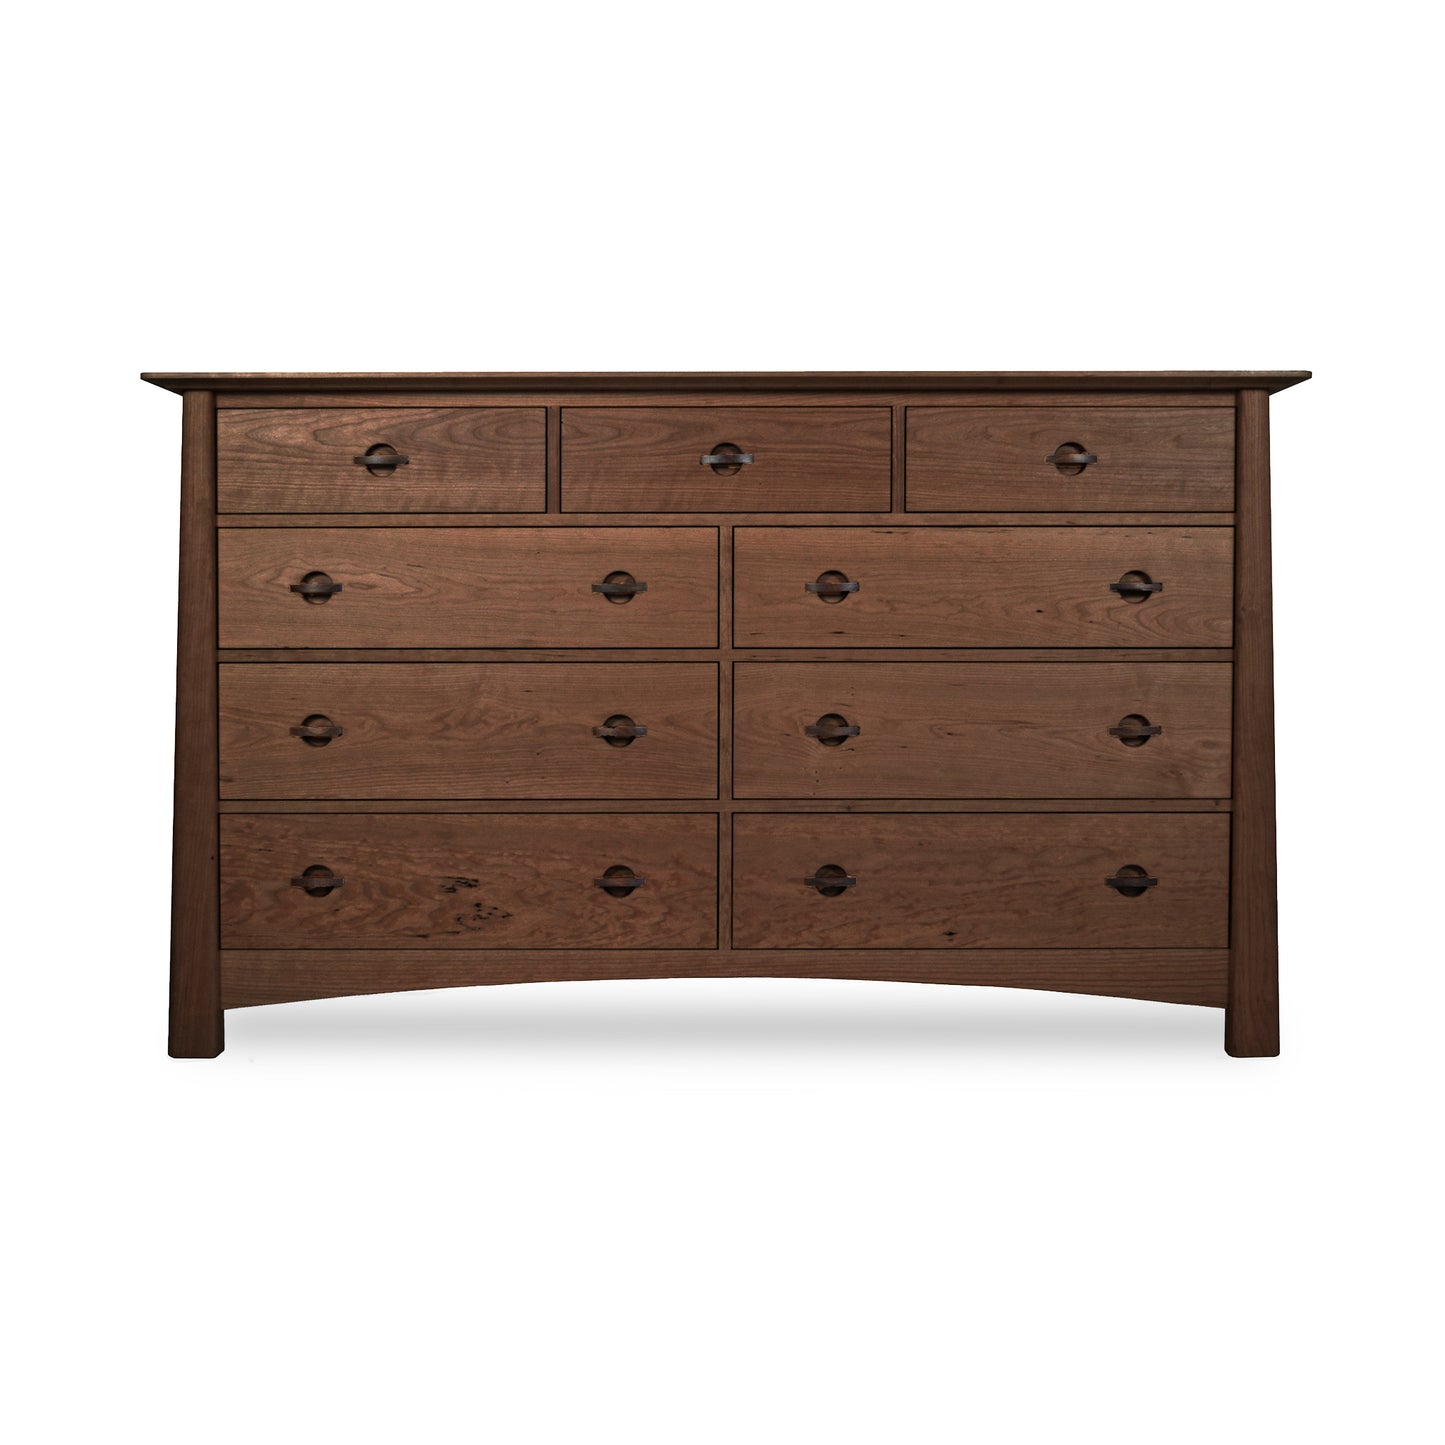 An eco-friendly Cherry Moon 9-Drawer Dresser made from reclaimed wood, featuring multiple drawers for storage, by Maple Corner Woodworks.